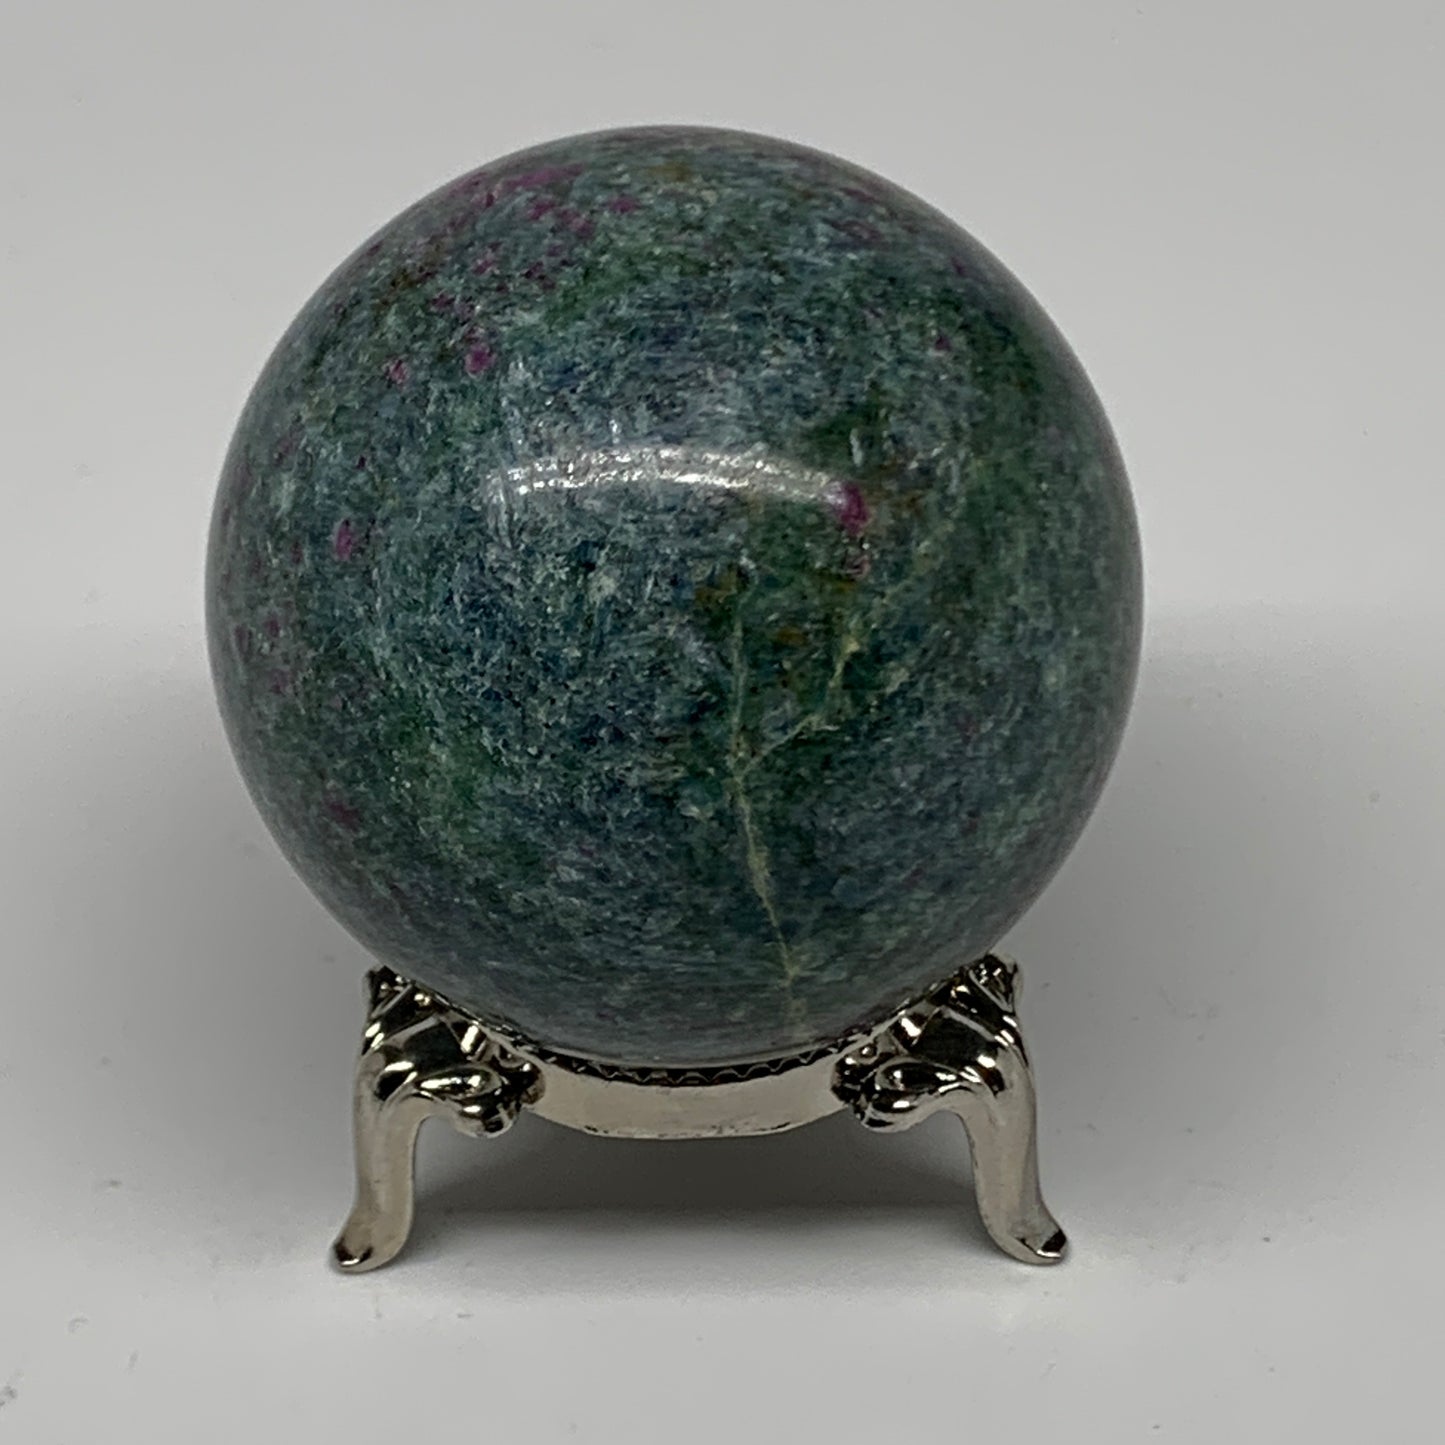 223.6g, 2"(50mm),Zoisite with Ruby Sphere Sphere Ball Crystal @India, B25031